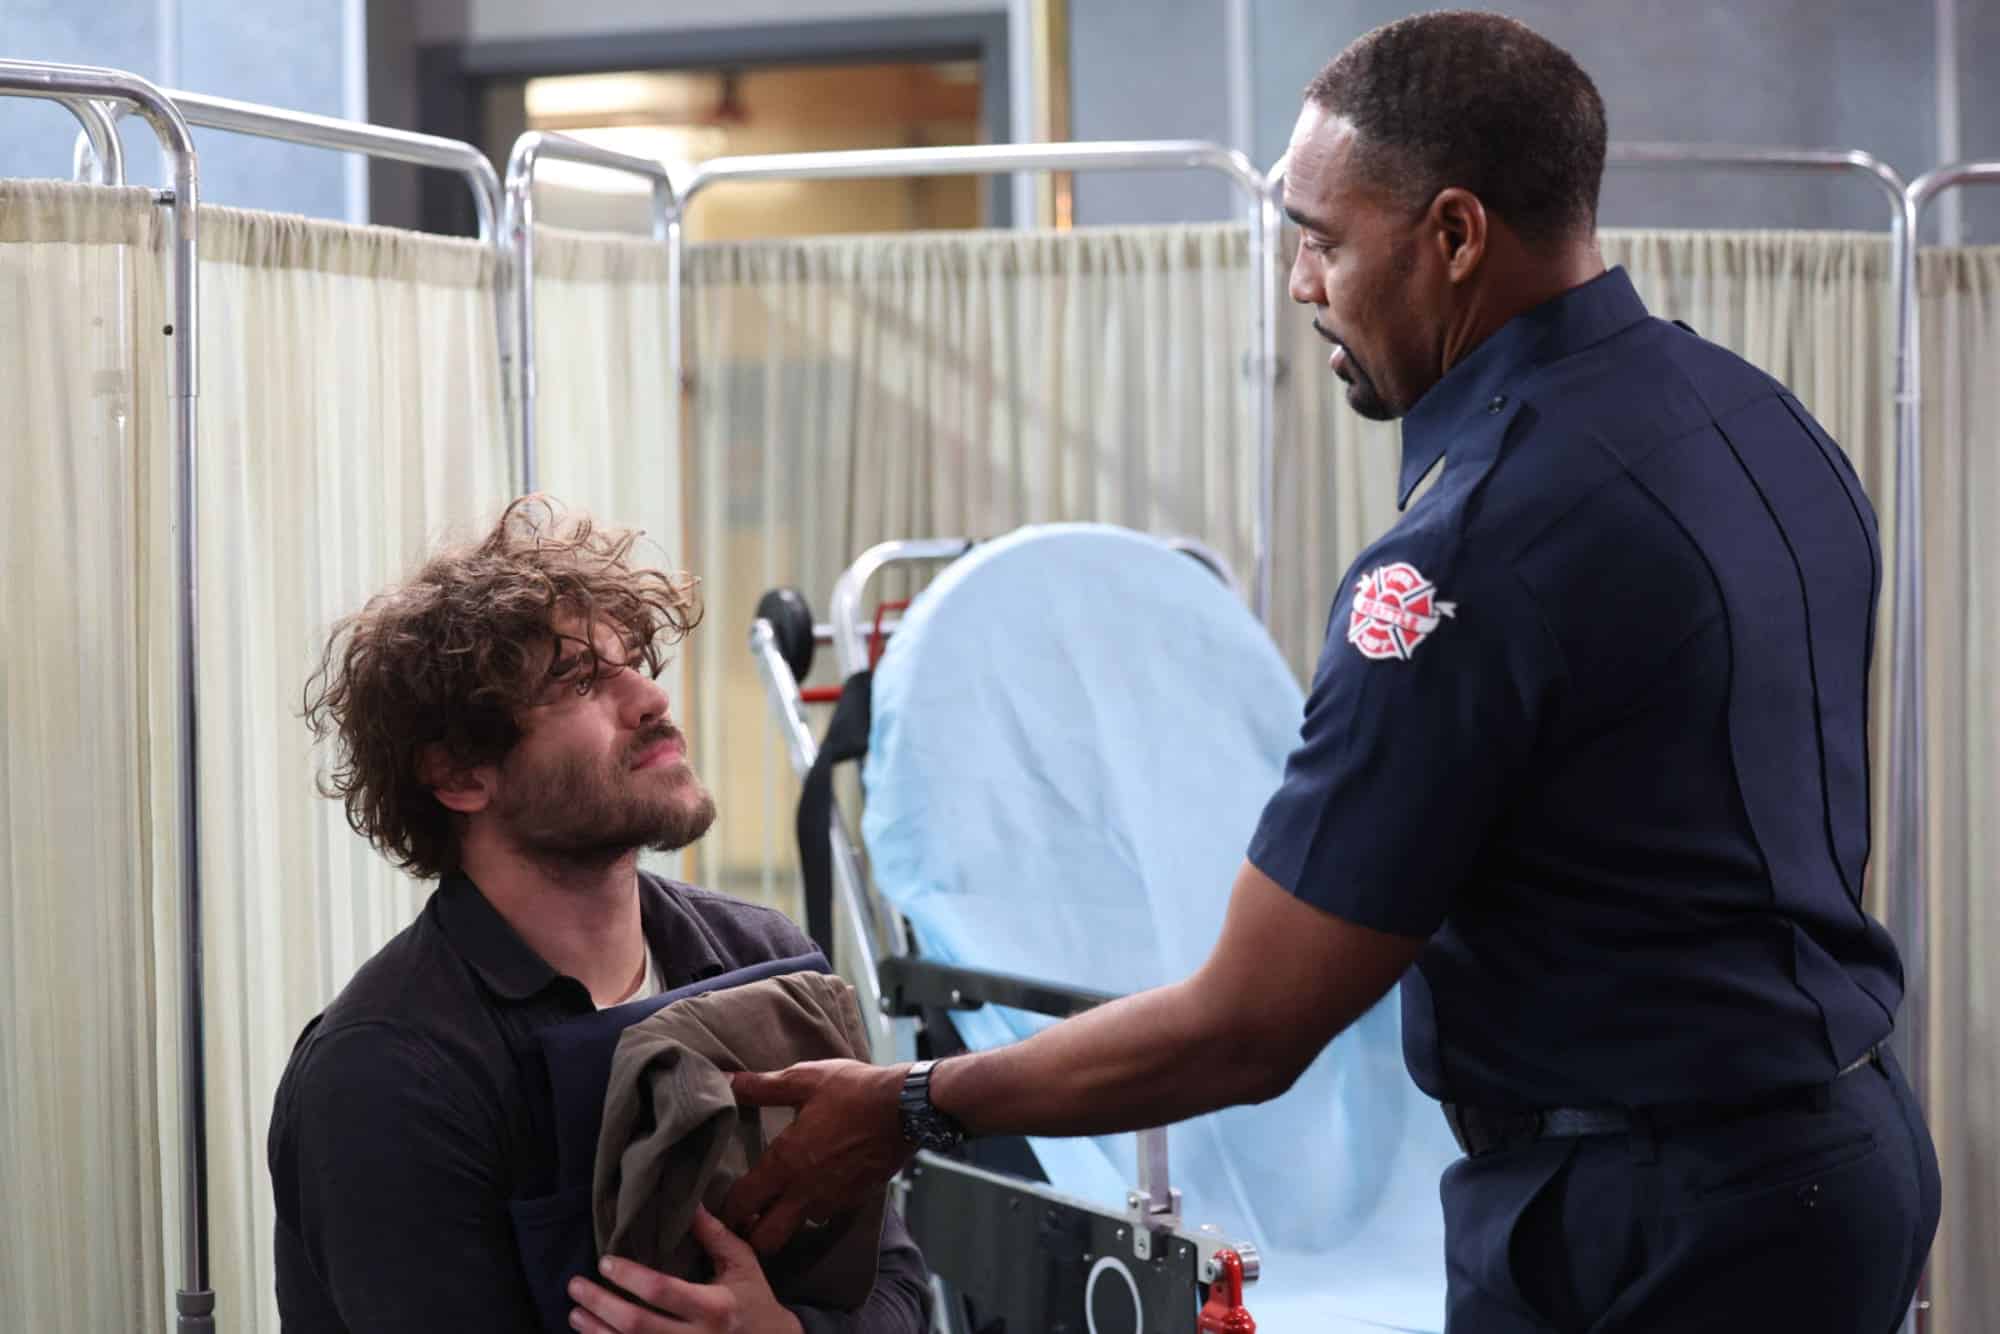 Station 19 Season 6 Episode 11 Release Date & Streaming Guide